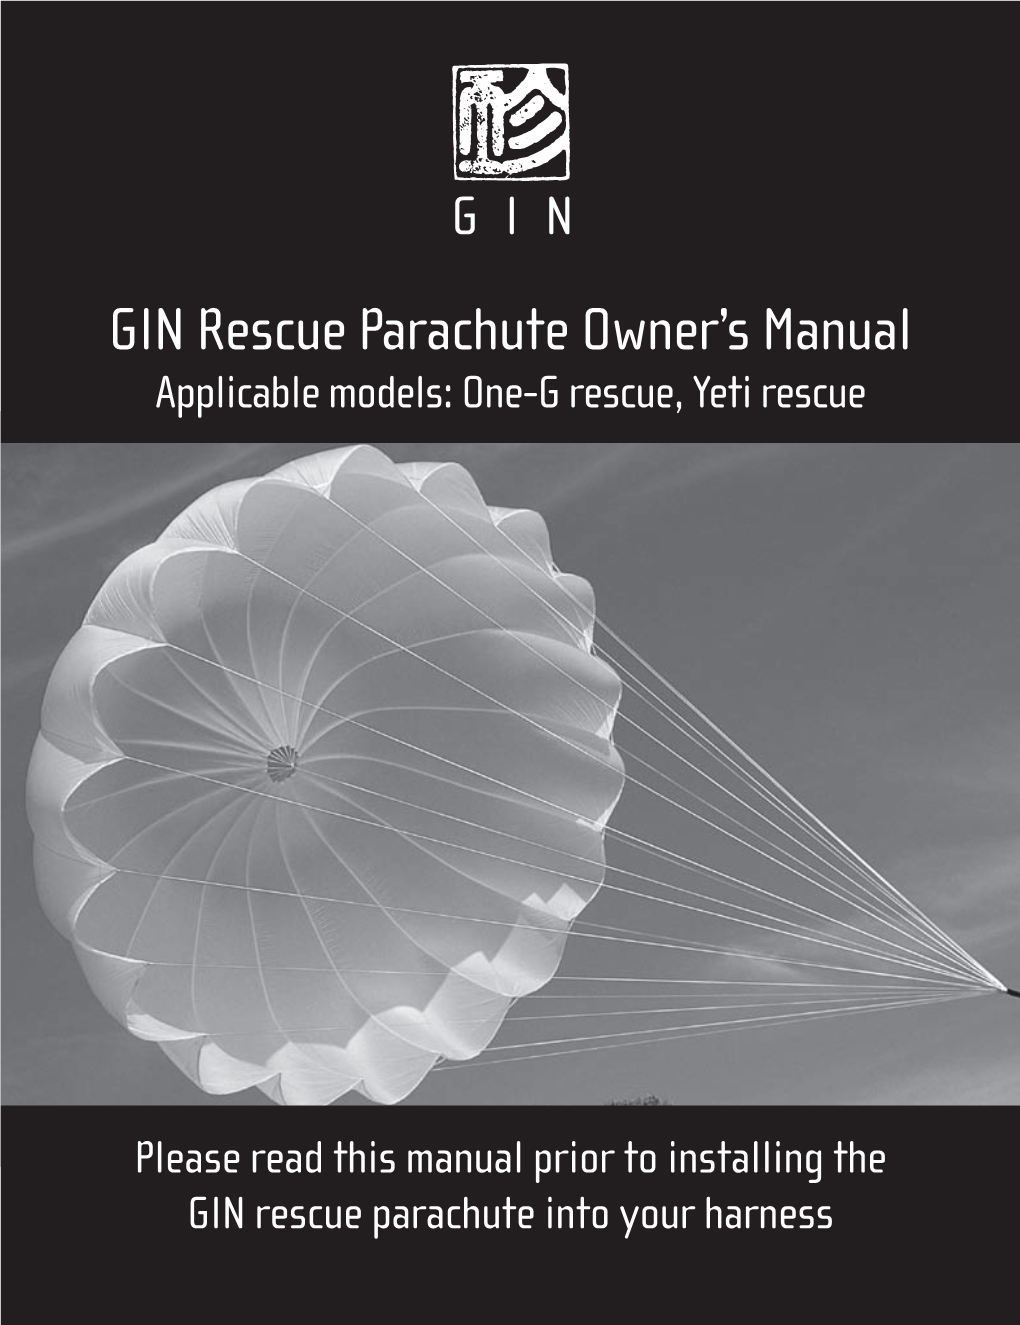 GIN Rescue Parachute Owner's Manual